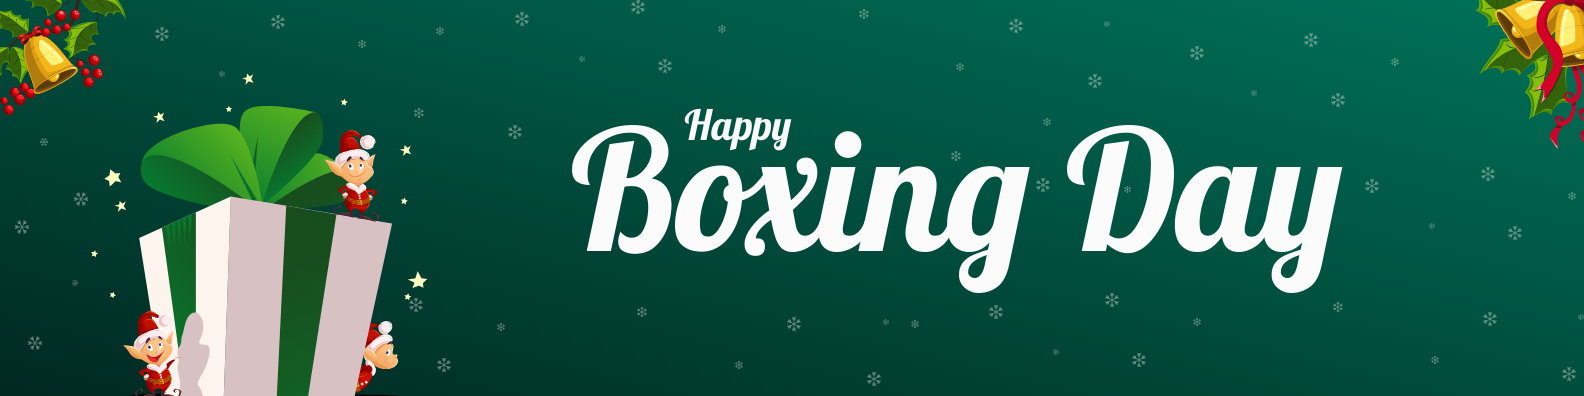 Green Background Happy Boxing Day Linkedin Banner Template